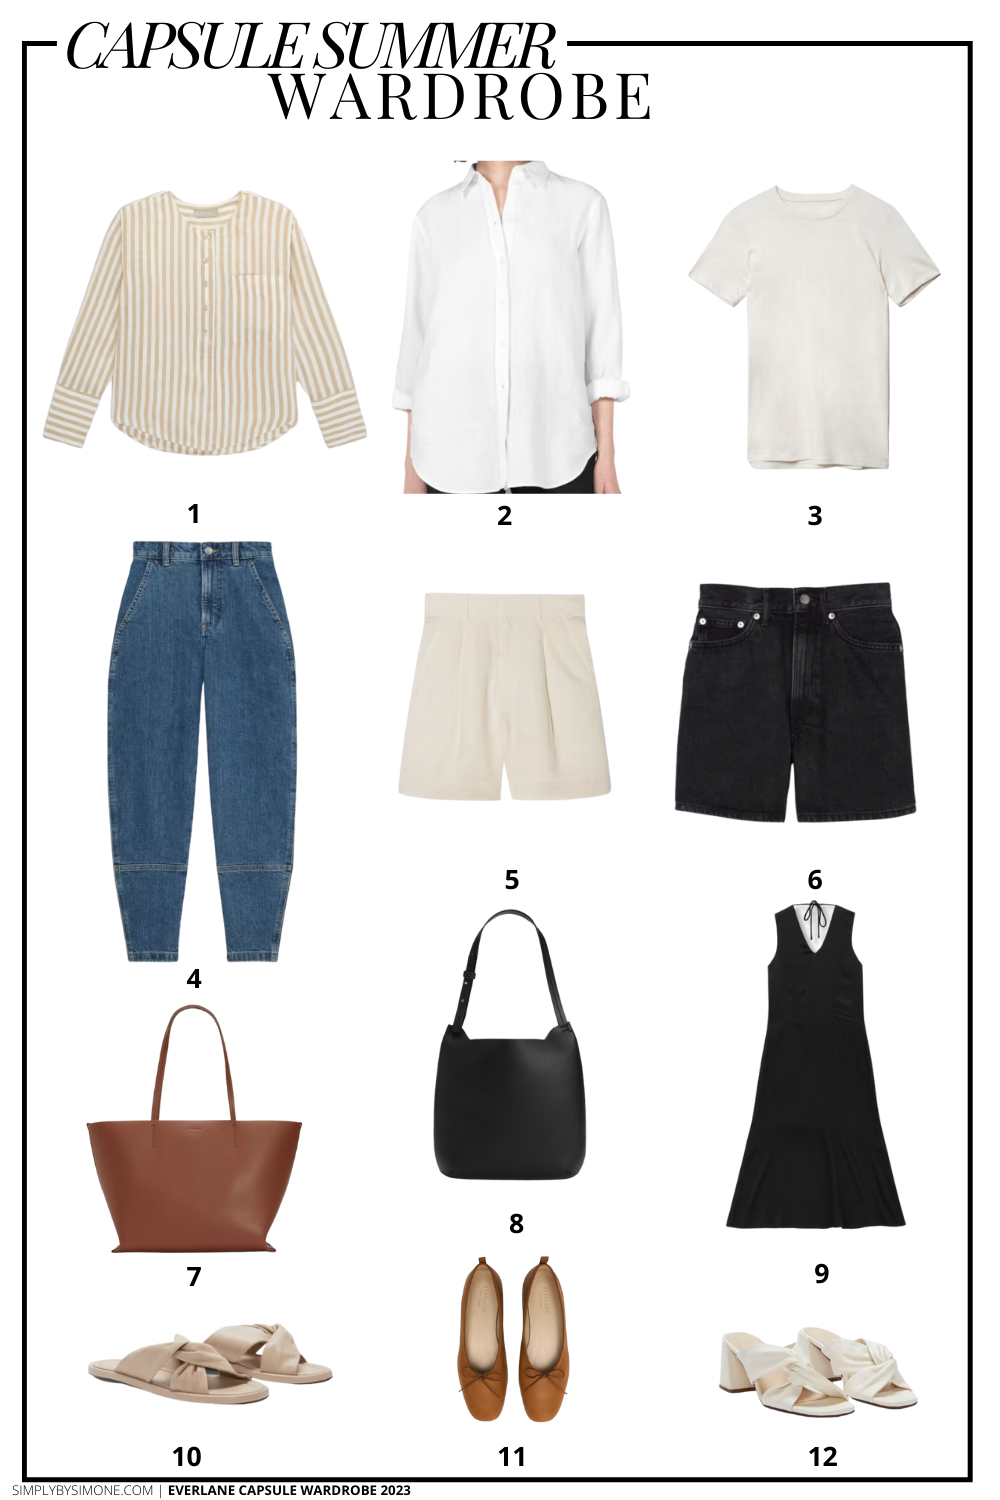  Affordable Everlane Summer Capsule Wardrobe | 12 Pieces, 48 Outfits | How to Build a Capsule Wardrobe | Everlane Summer Clothes | Outfit Inspiration | 48 Summer Weather Outfit Ideas | Summer Vacation Packing Guide | Everlane Summer Capsule Wardrobe - What To Wear This Summer 2023, European Outfit Ideas | Items 1-12 | Simply by Simone